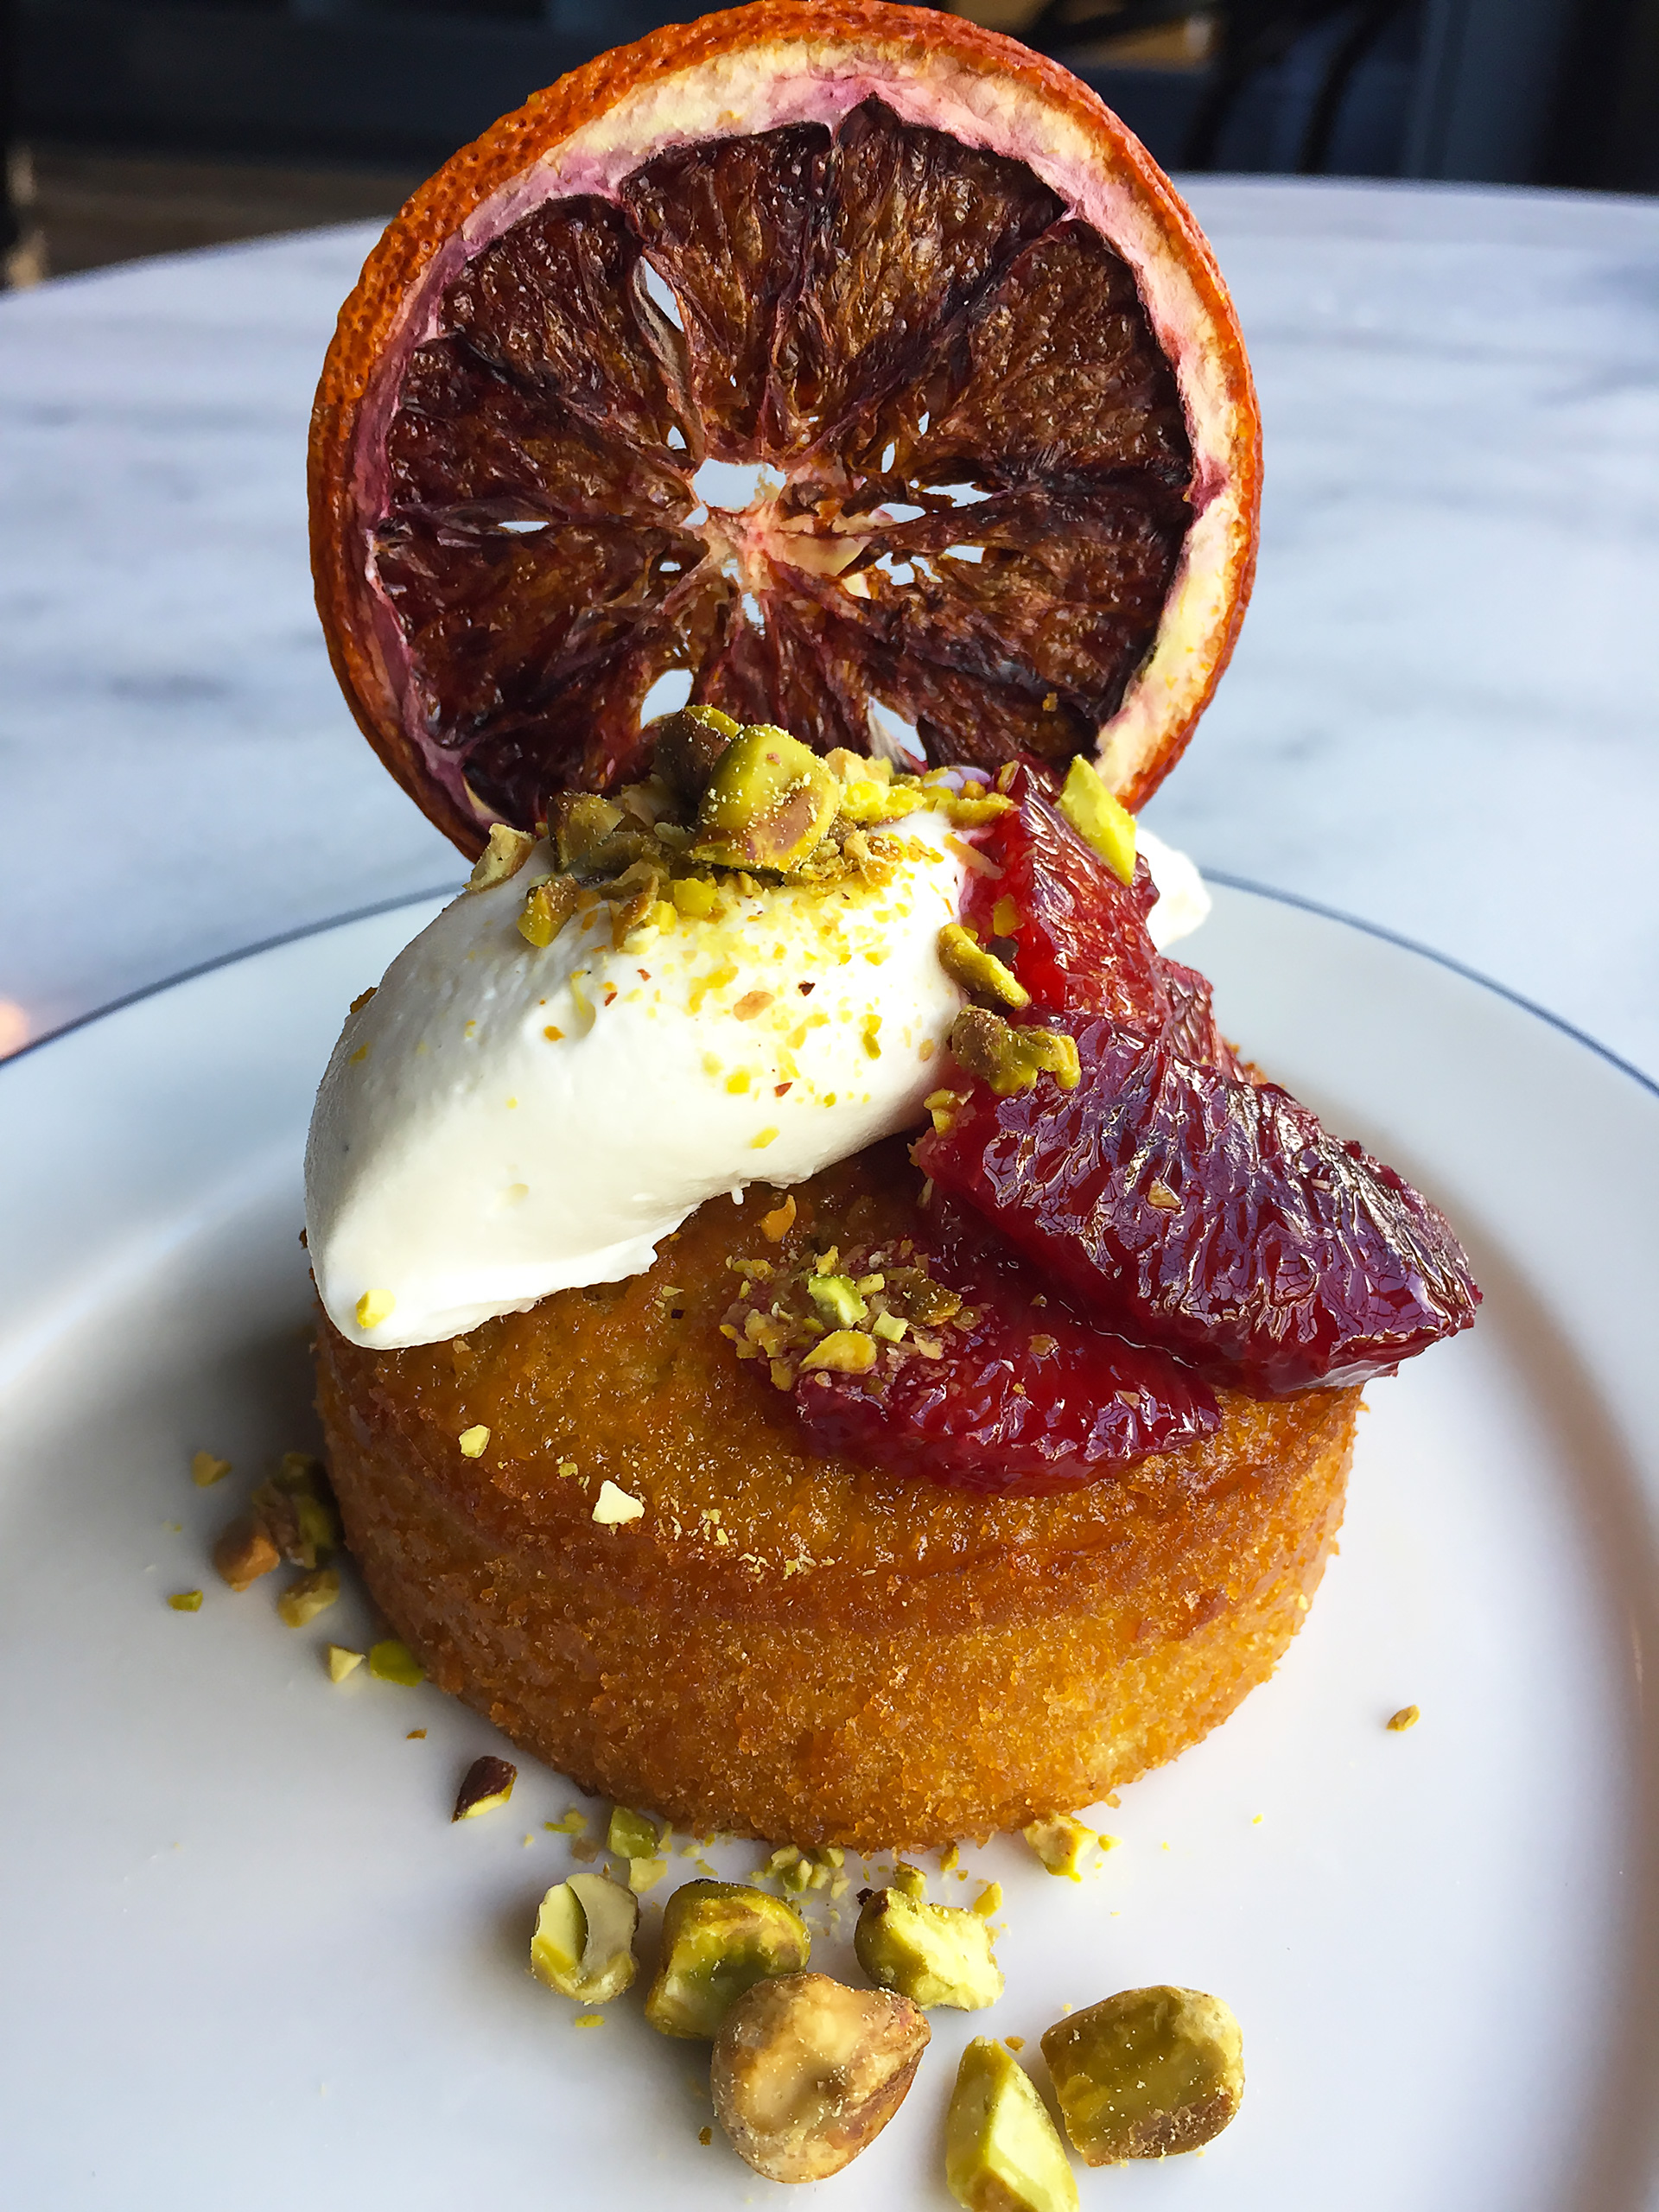 Olive oil cake with blood oranges and pistachios